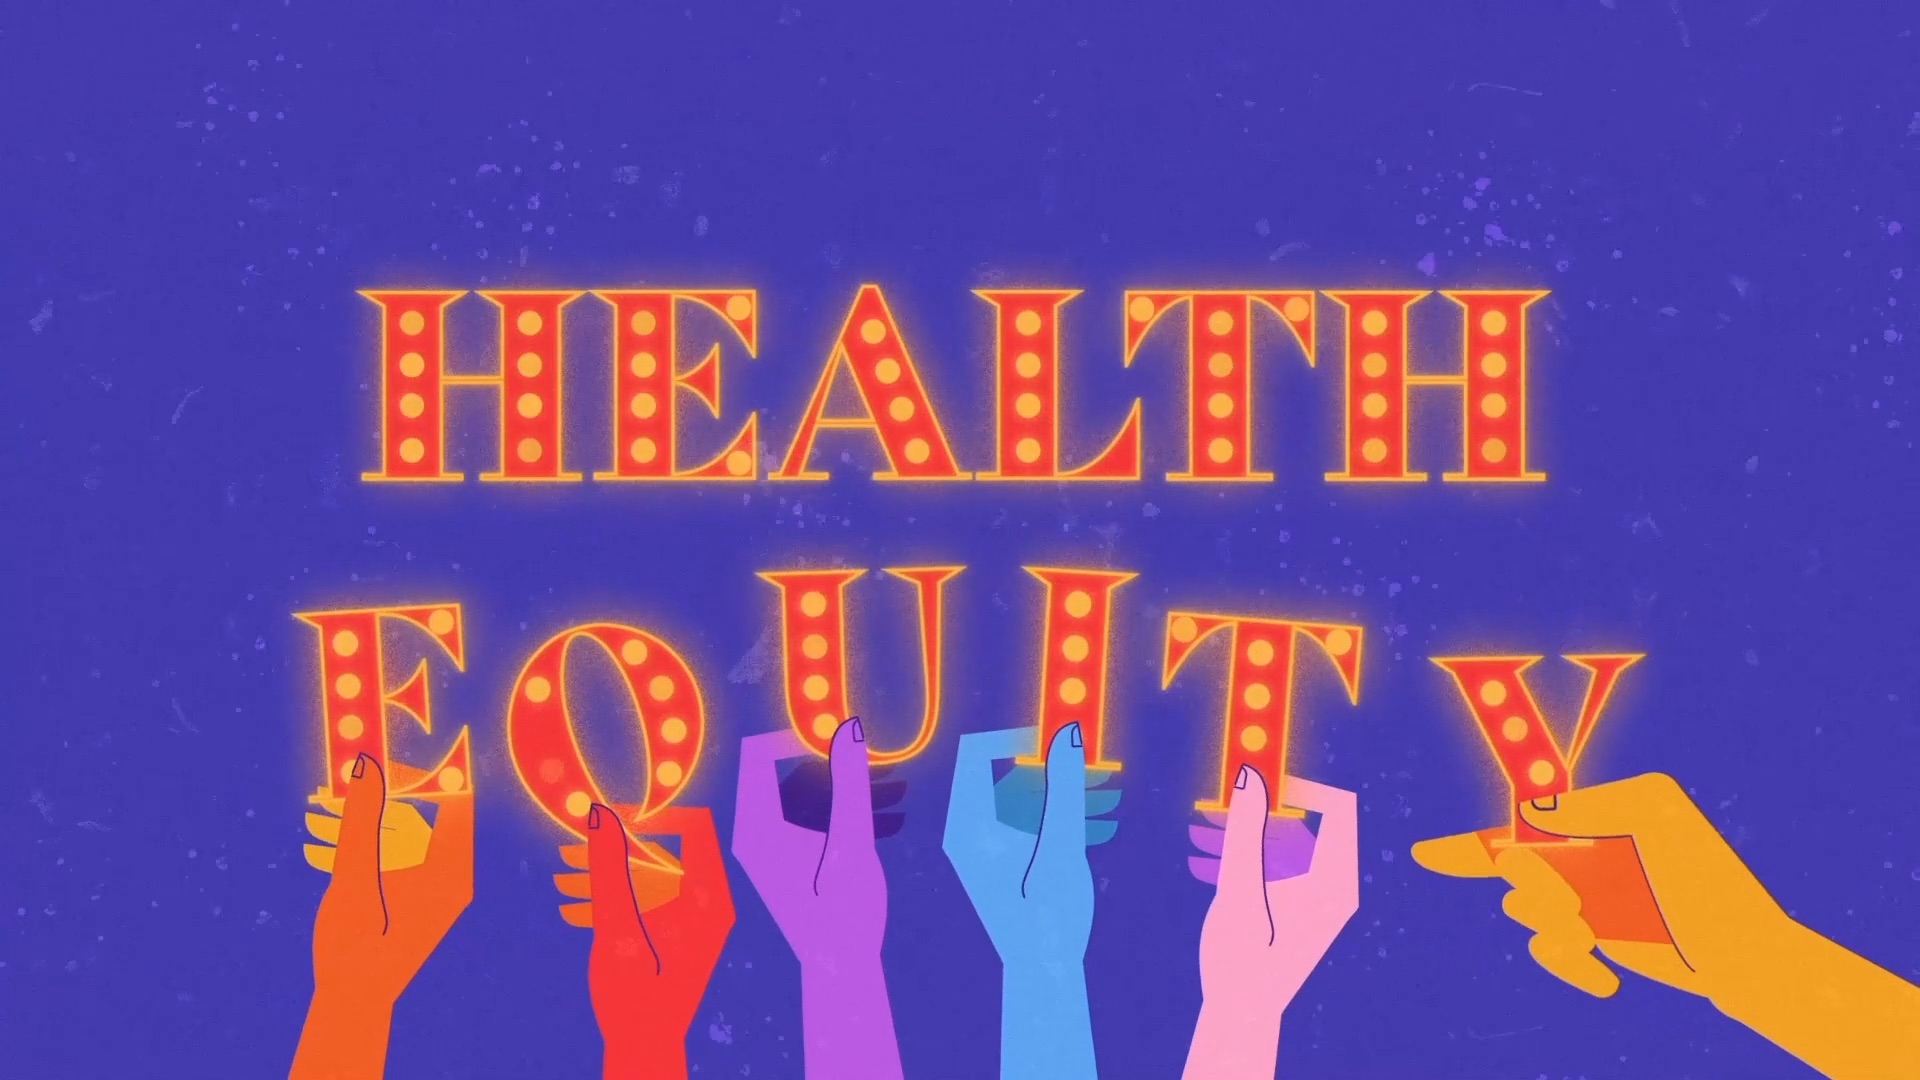 An illustration of hands holding up letters that spell "Health Equity."